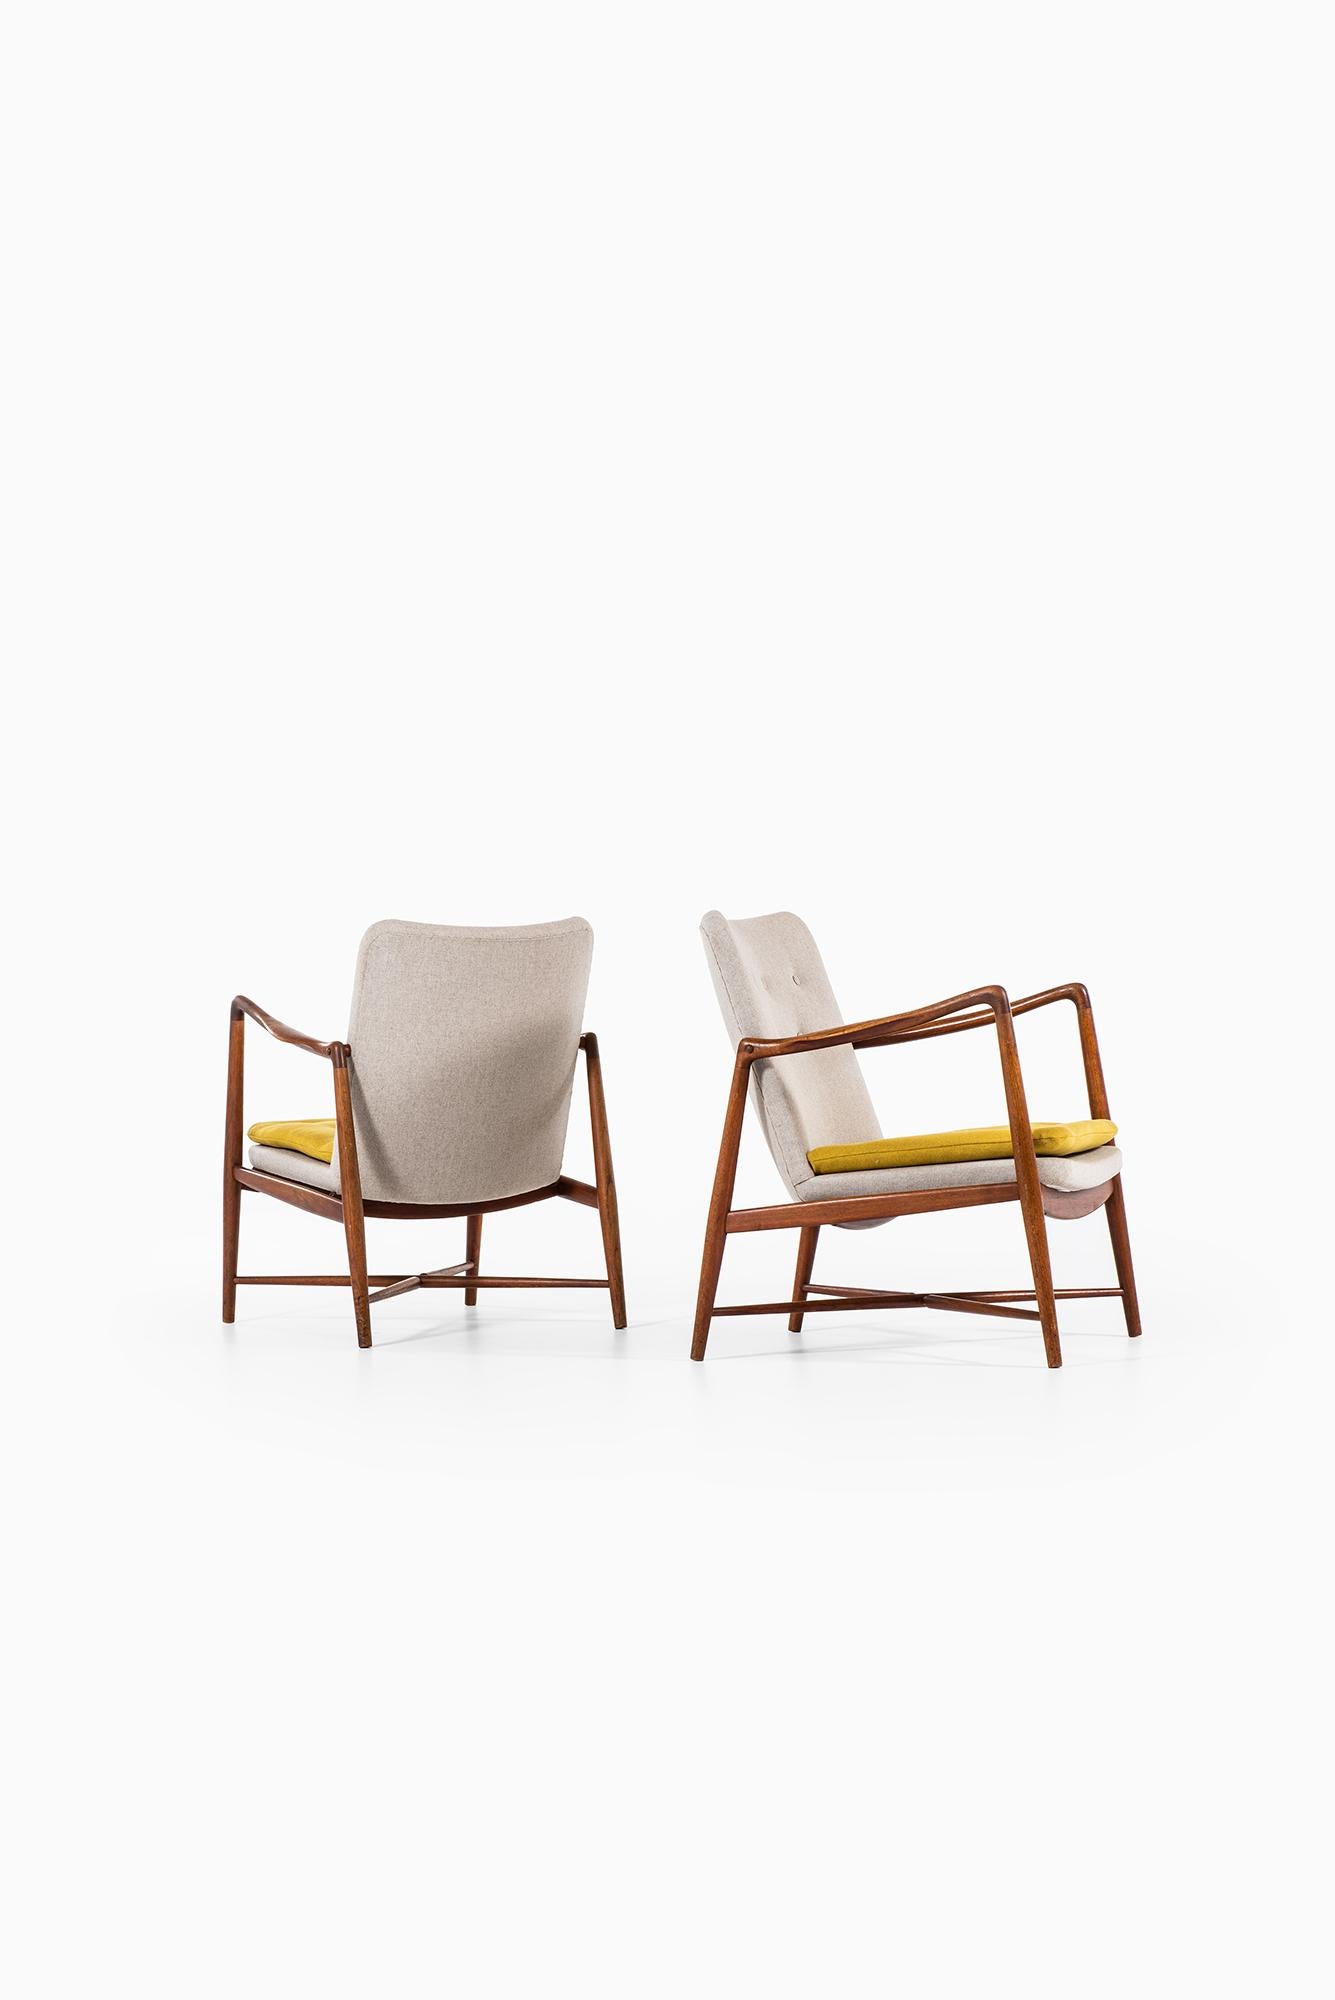 Rare pair of easy chairs model BO59/ fireplace chair designed by Finn Juhl. Produced by Bovirke in Denmark. Teak and newly reupholstered in grey and yellow fabric.